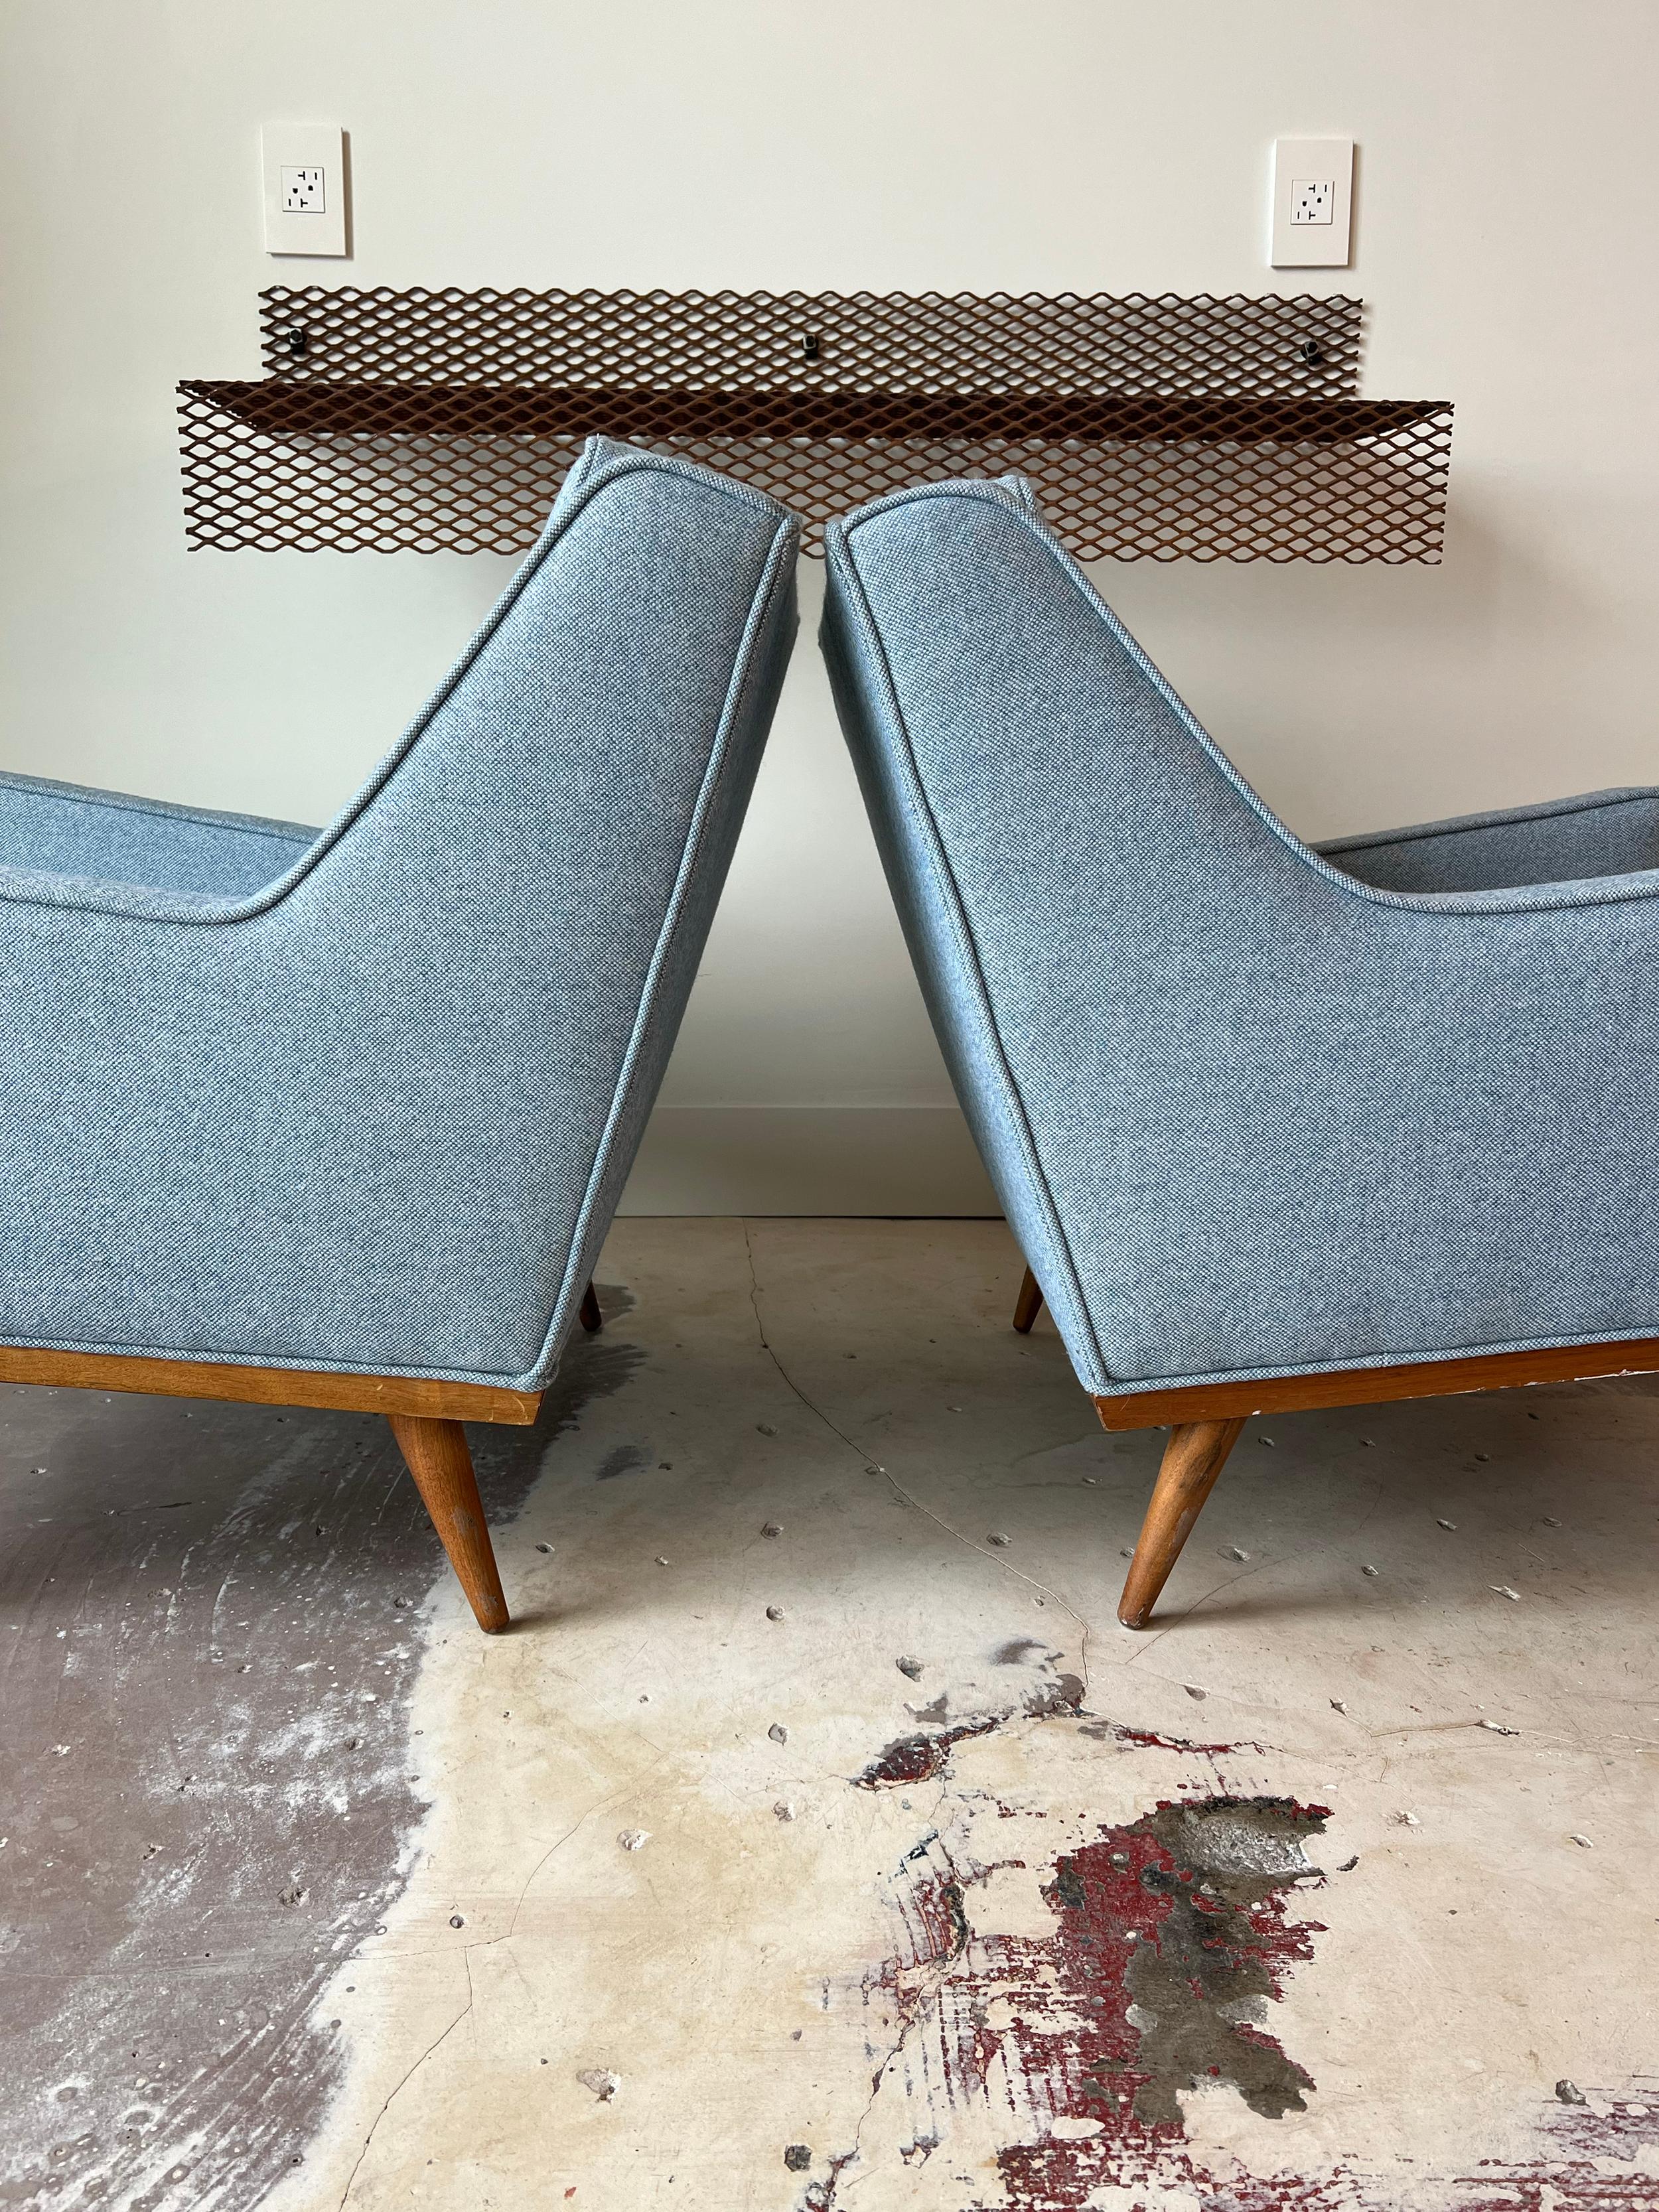 Pair of vintage club/lounge chairs by Milo Baughman for James Inc (Thayer Coggin). New upholstery done in soft Maharam wool Hallingdal and new foam throughout. Great pair of chairs with excellent profile lines and proportions. Ready for use.